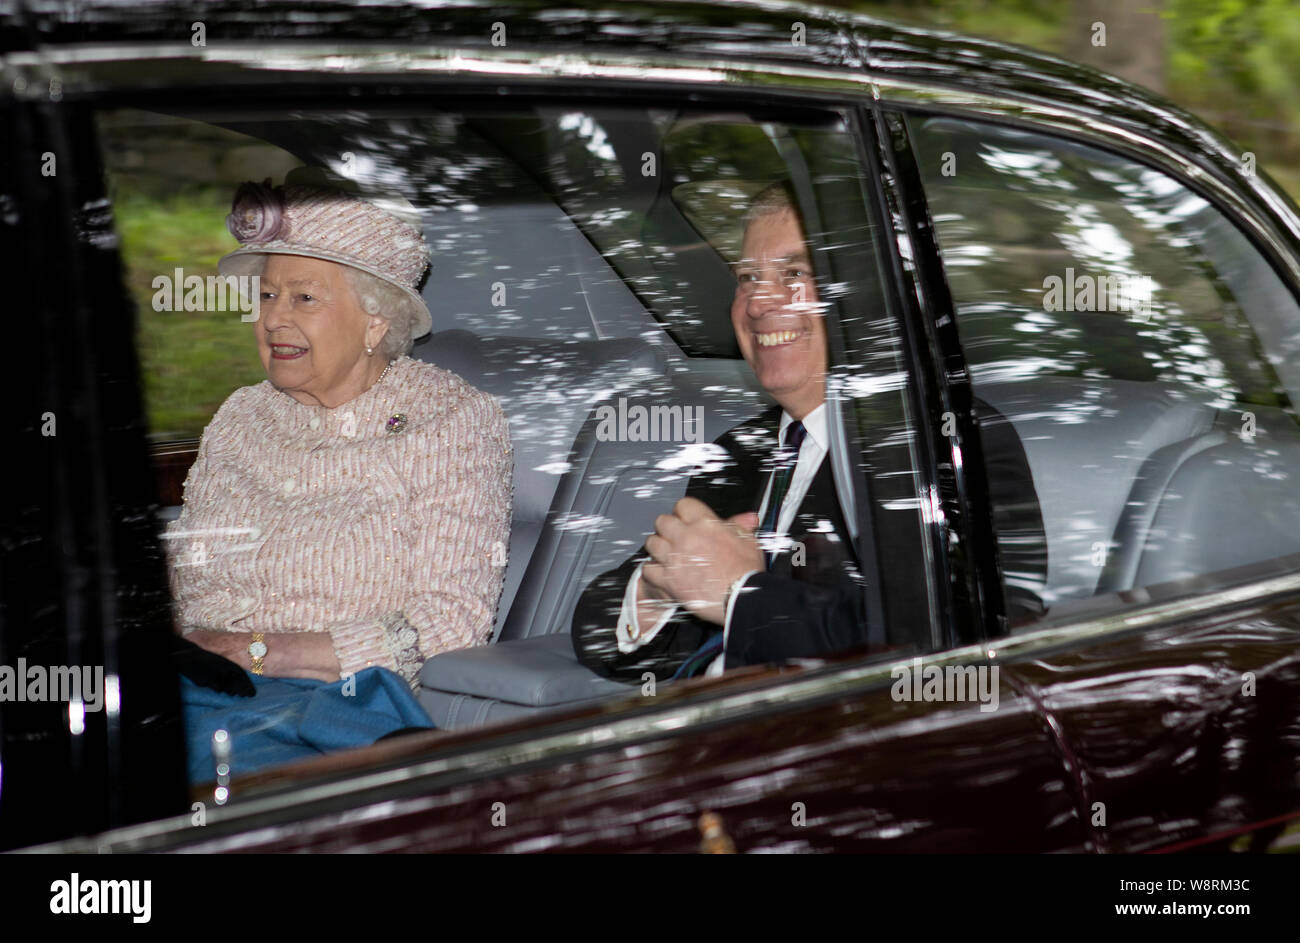 Queen Elizabeth II and the Duke of York leave Crathie Kirk after attending a Sunday church service near Balmoral where she is currently spending her summer holidays. Stock Photo